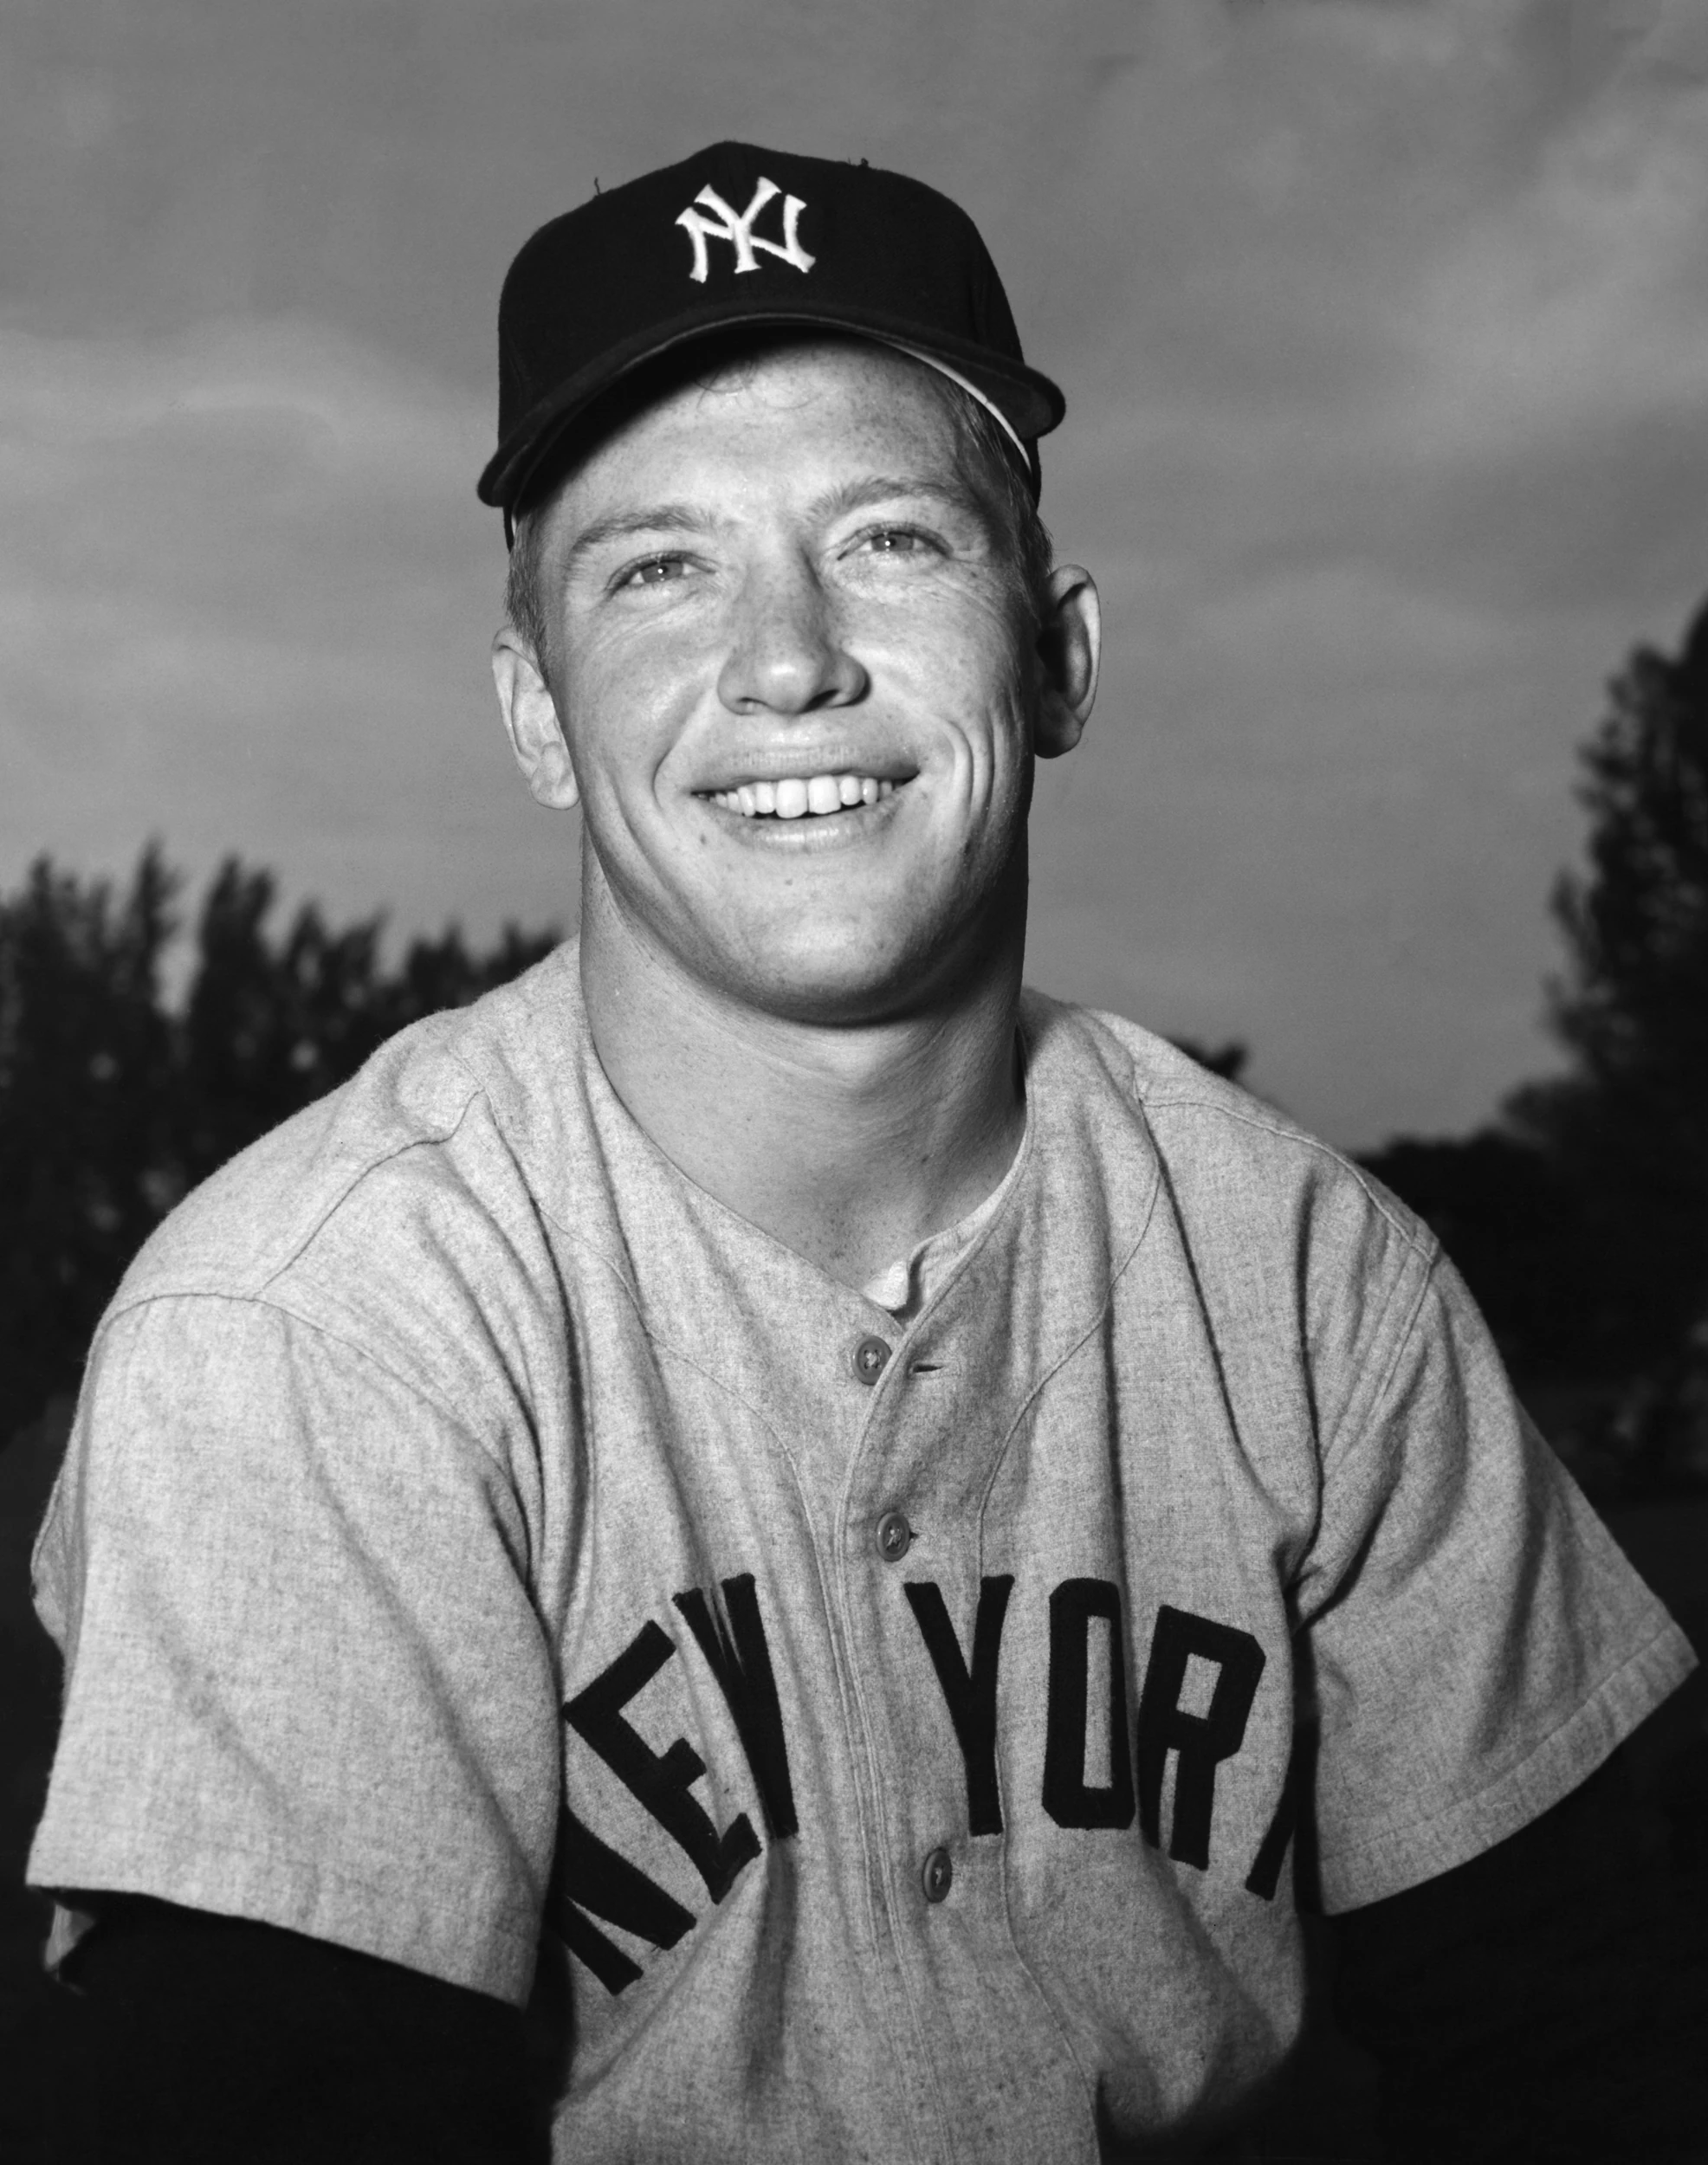 Mickey Mantle, The Kid From Spavinaw: You Could Have Done Better